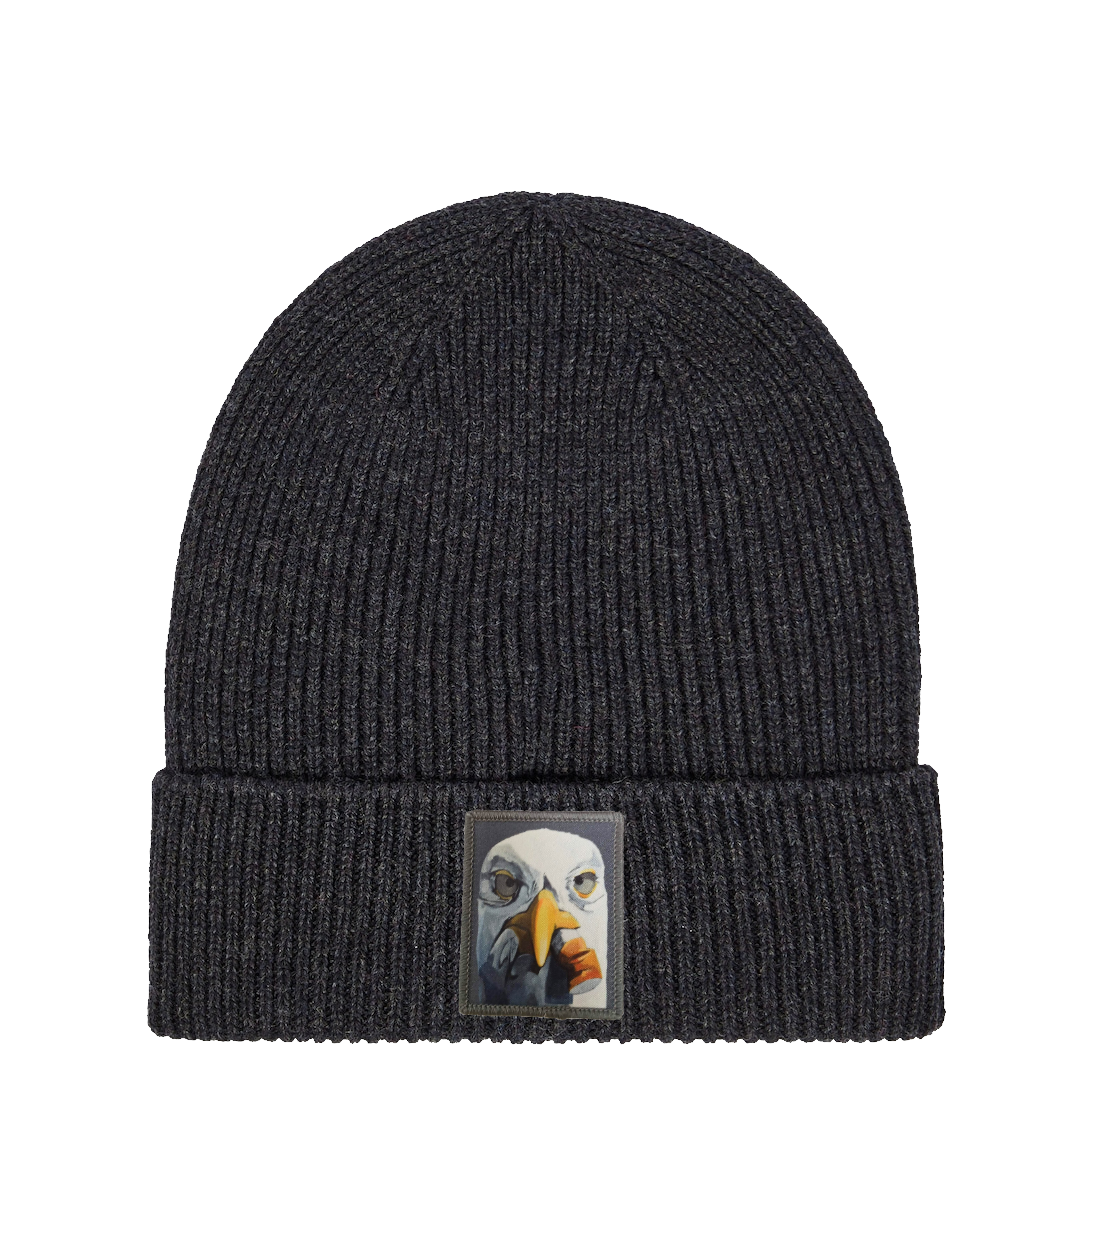 Merino Wool Beanie Charcoal Hats FlynHats Seagull with Cig  